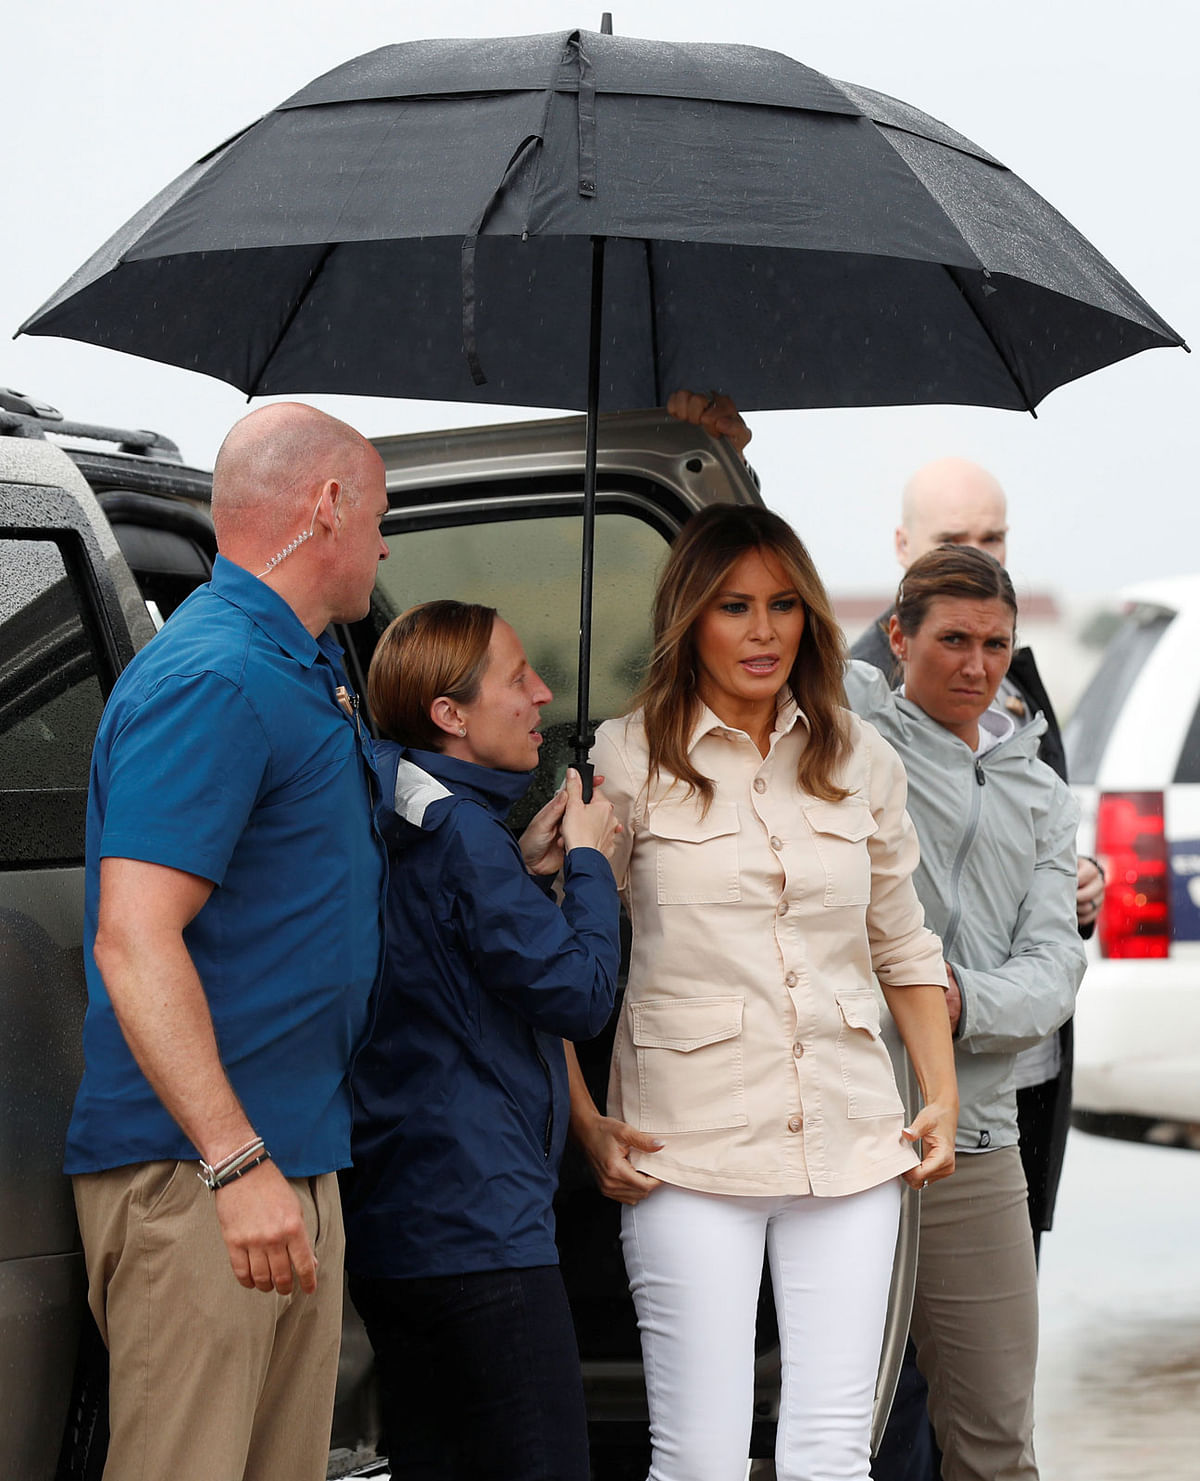 US first lady Melania Trump arrives at the McAllen airport as she prepares to depart after a visit to the US-Mexico border area in McAllen Texas, US on 21 June. Photo: AFP